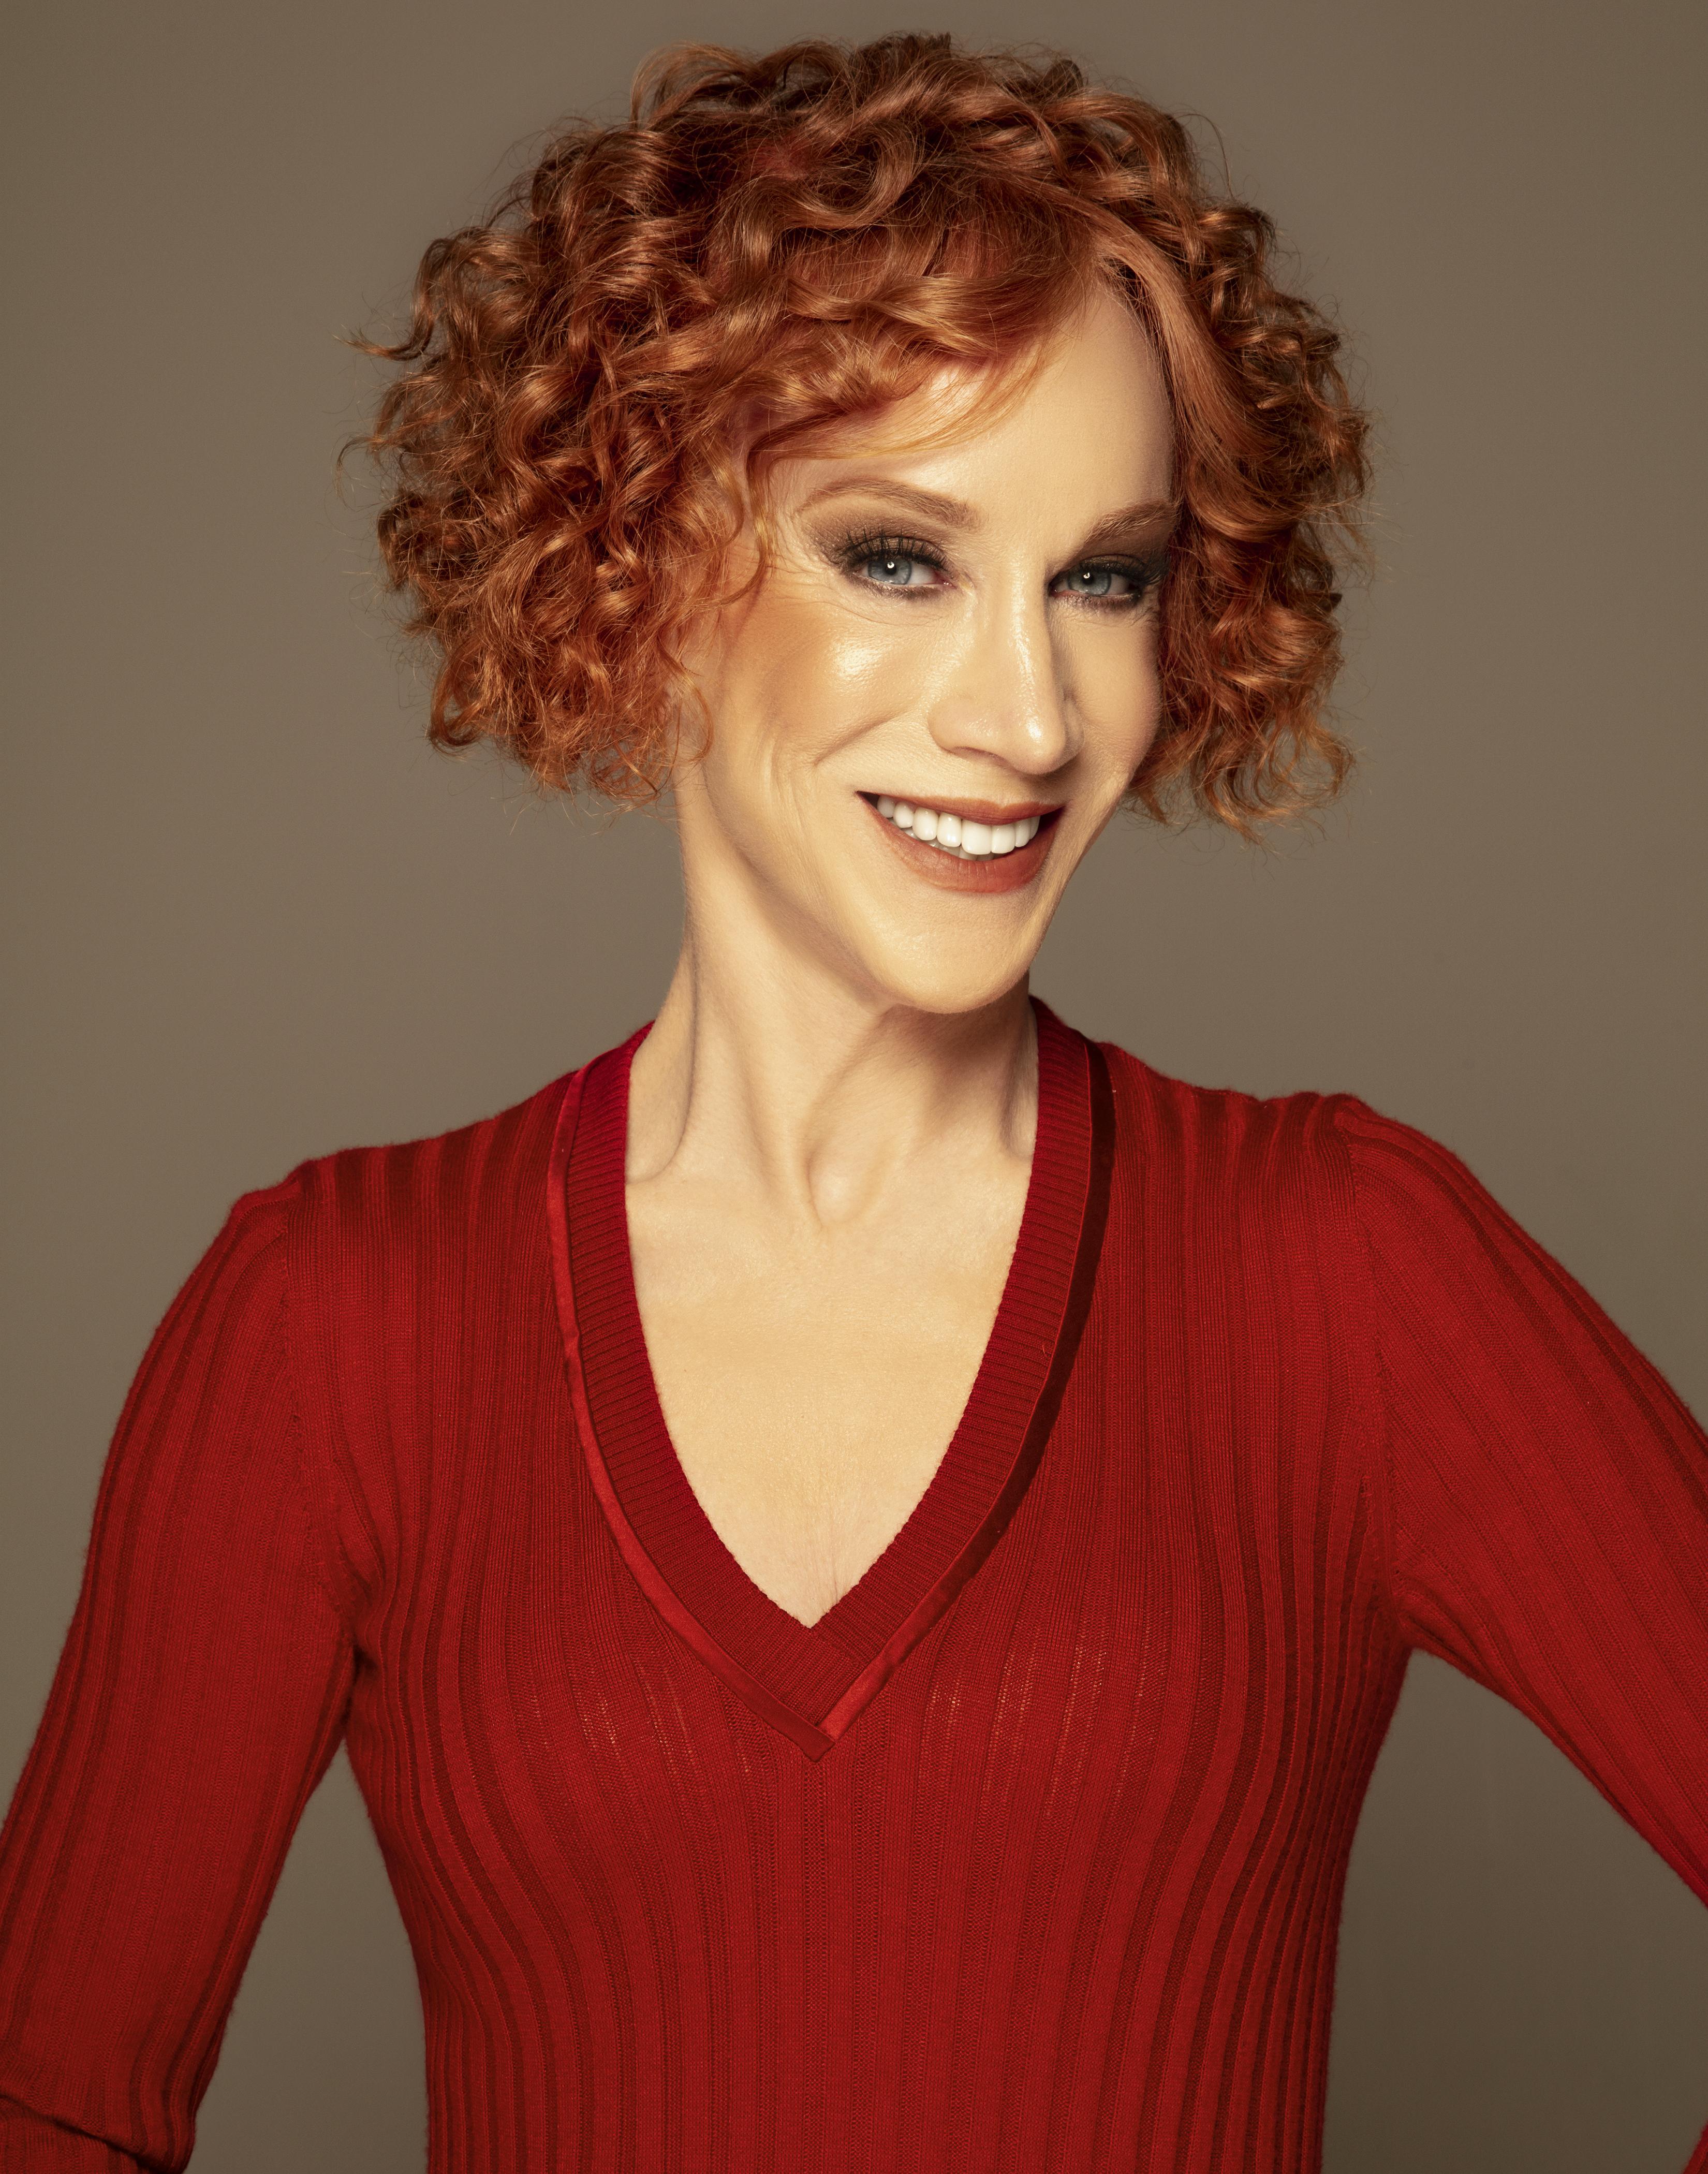 Kathy Griffin image